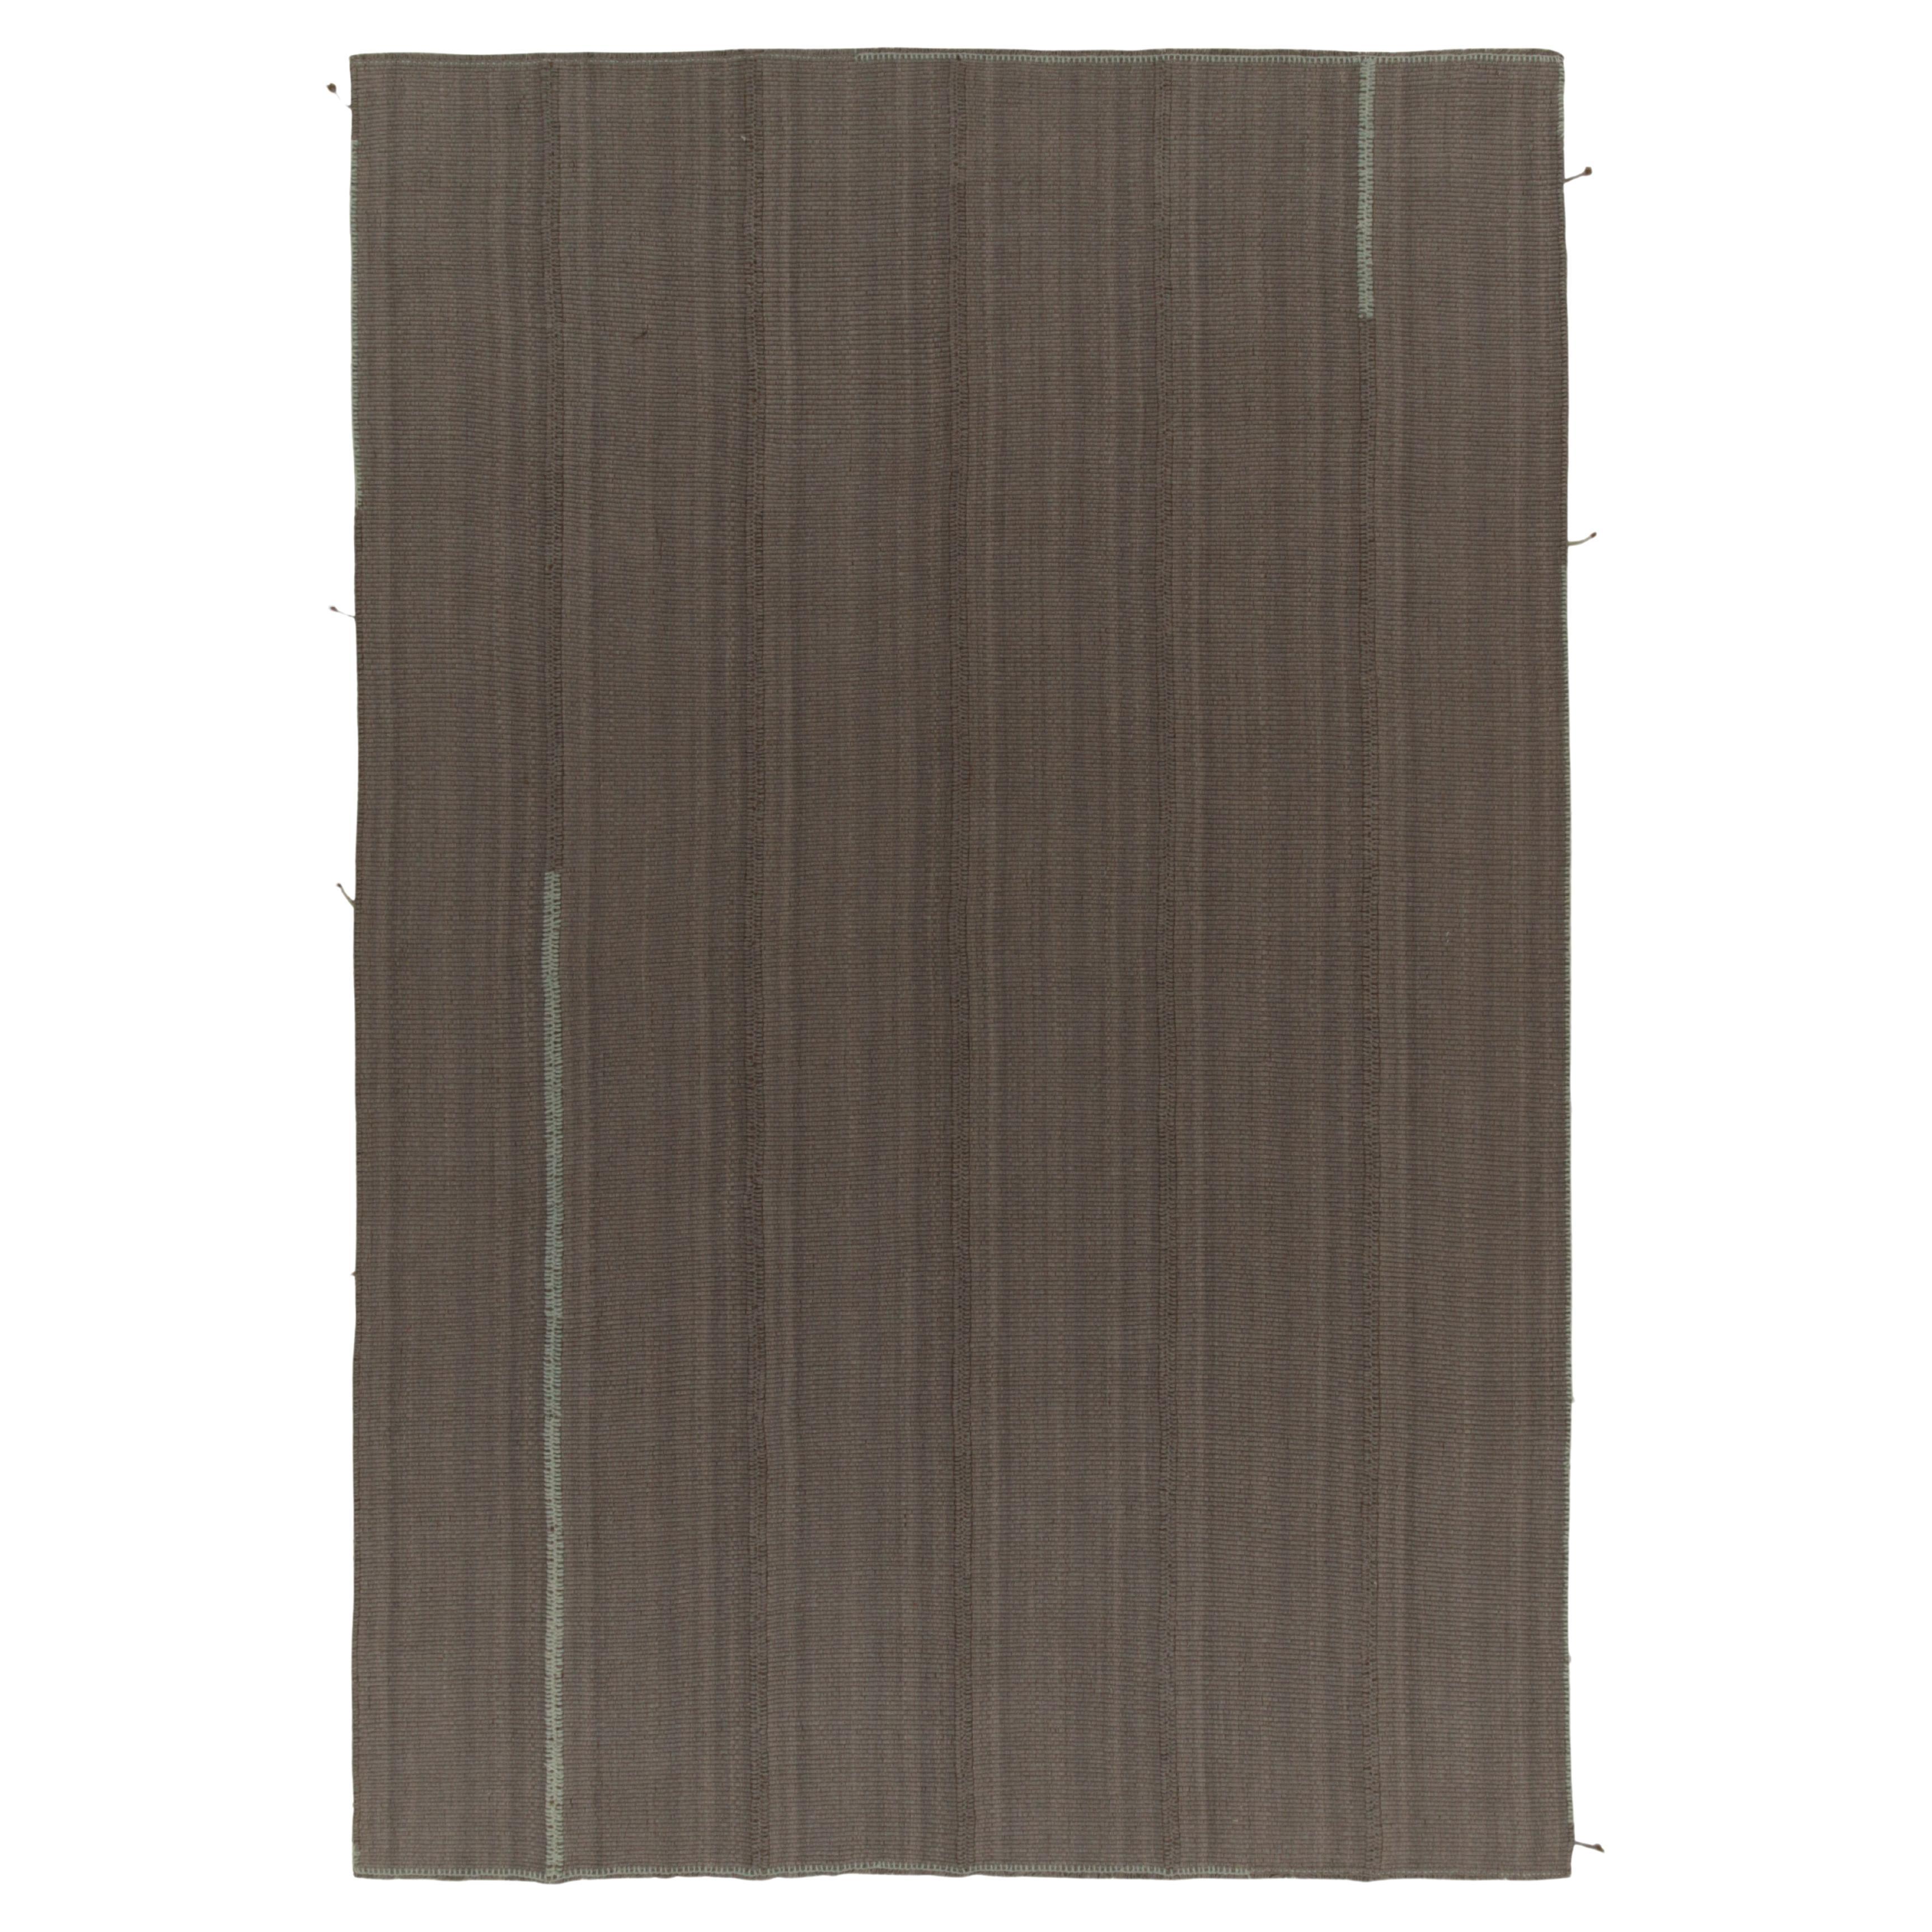 Rug & Kilim’s Modern Kilims in Brown Panel Woven style For Sale